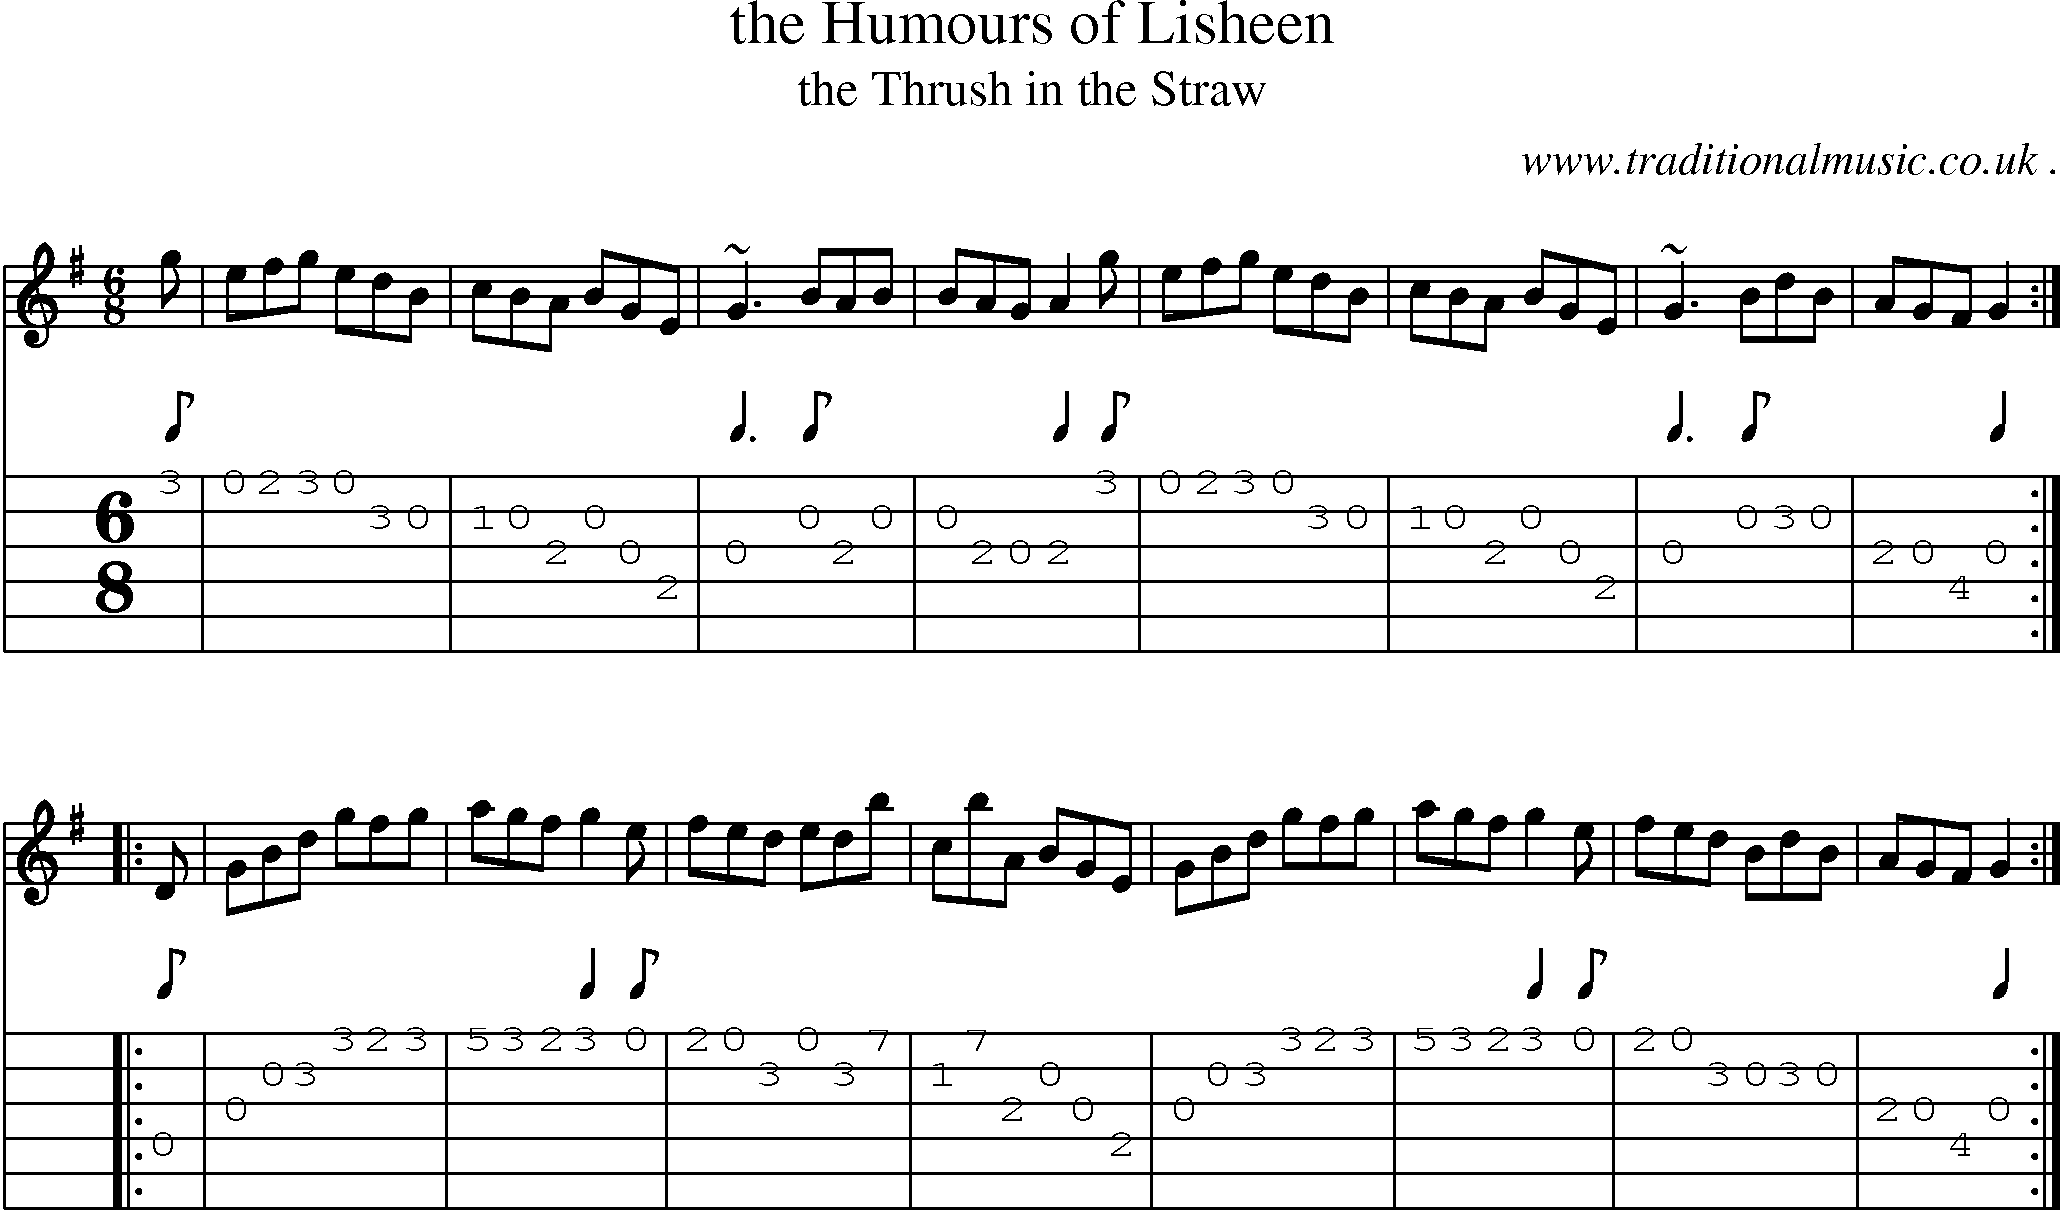 Sheet-music  score, Chords and Guitar Tabs for The Humours Of Lisheen